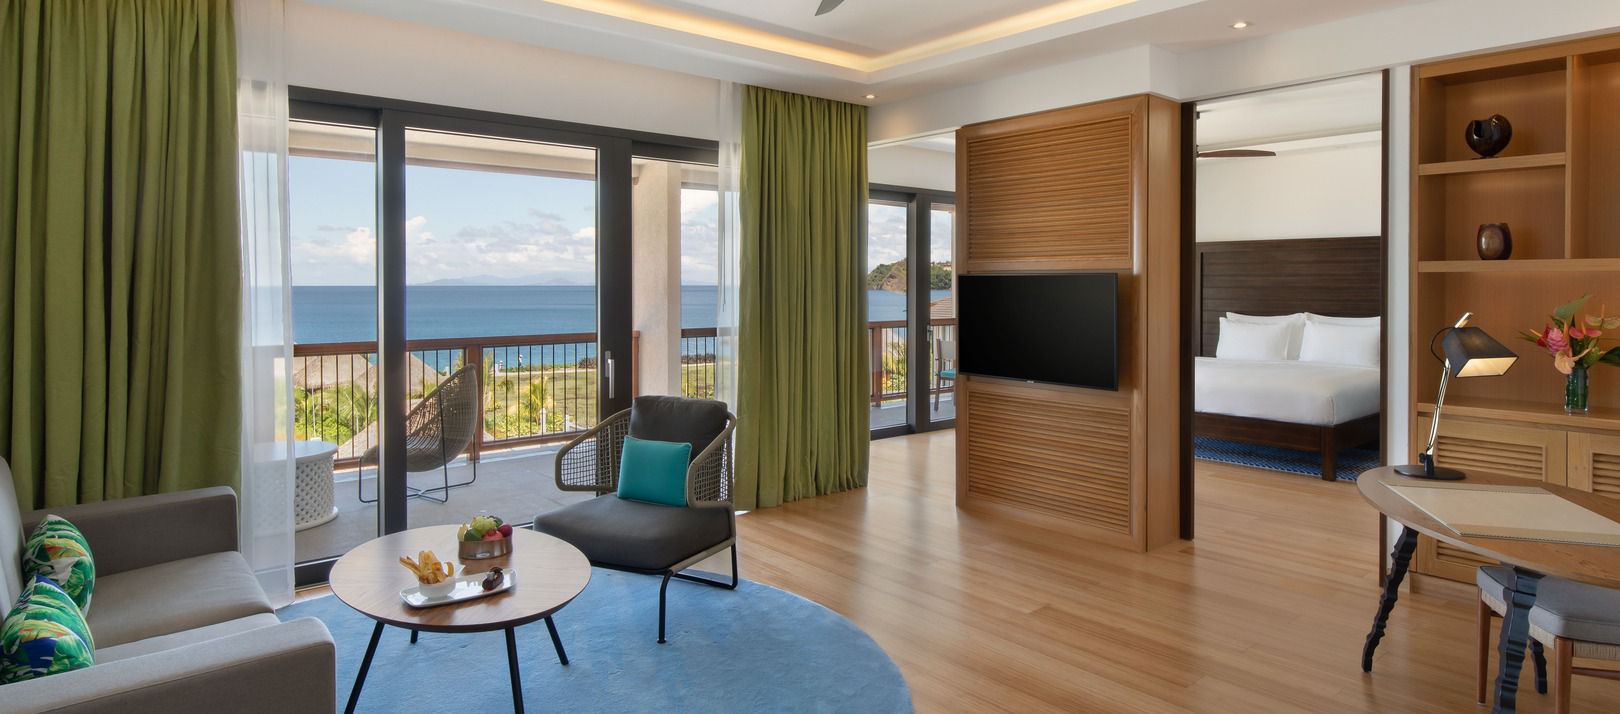 Our luxury suites feature ocean views and more space